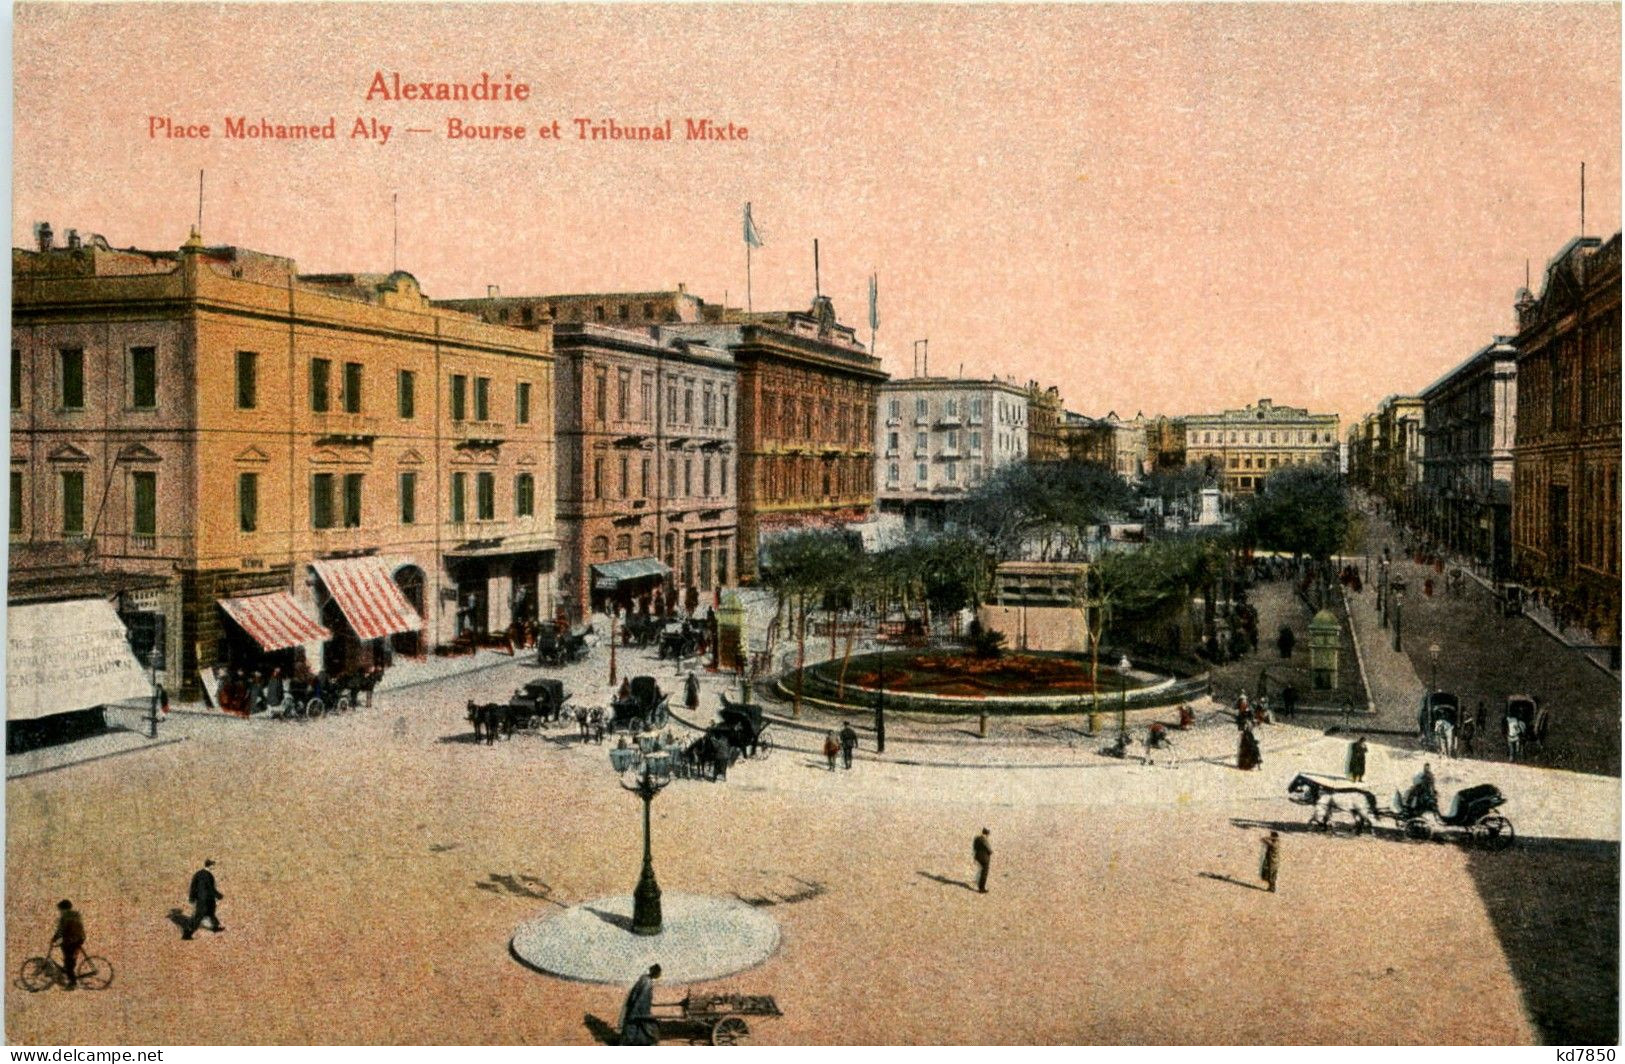 Alexandria - Place Mohamed Aly - Alexandrie